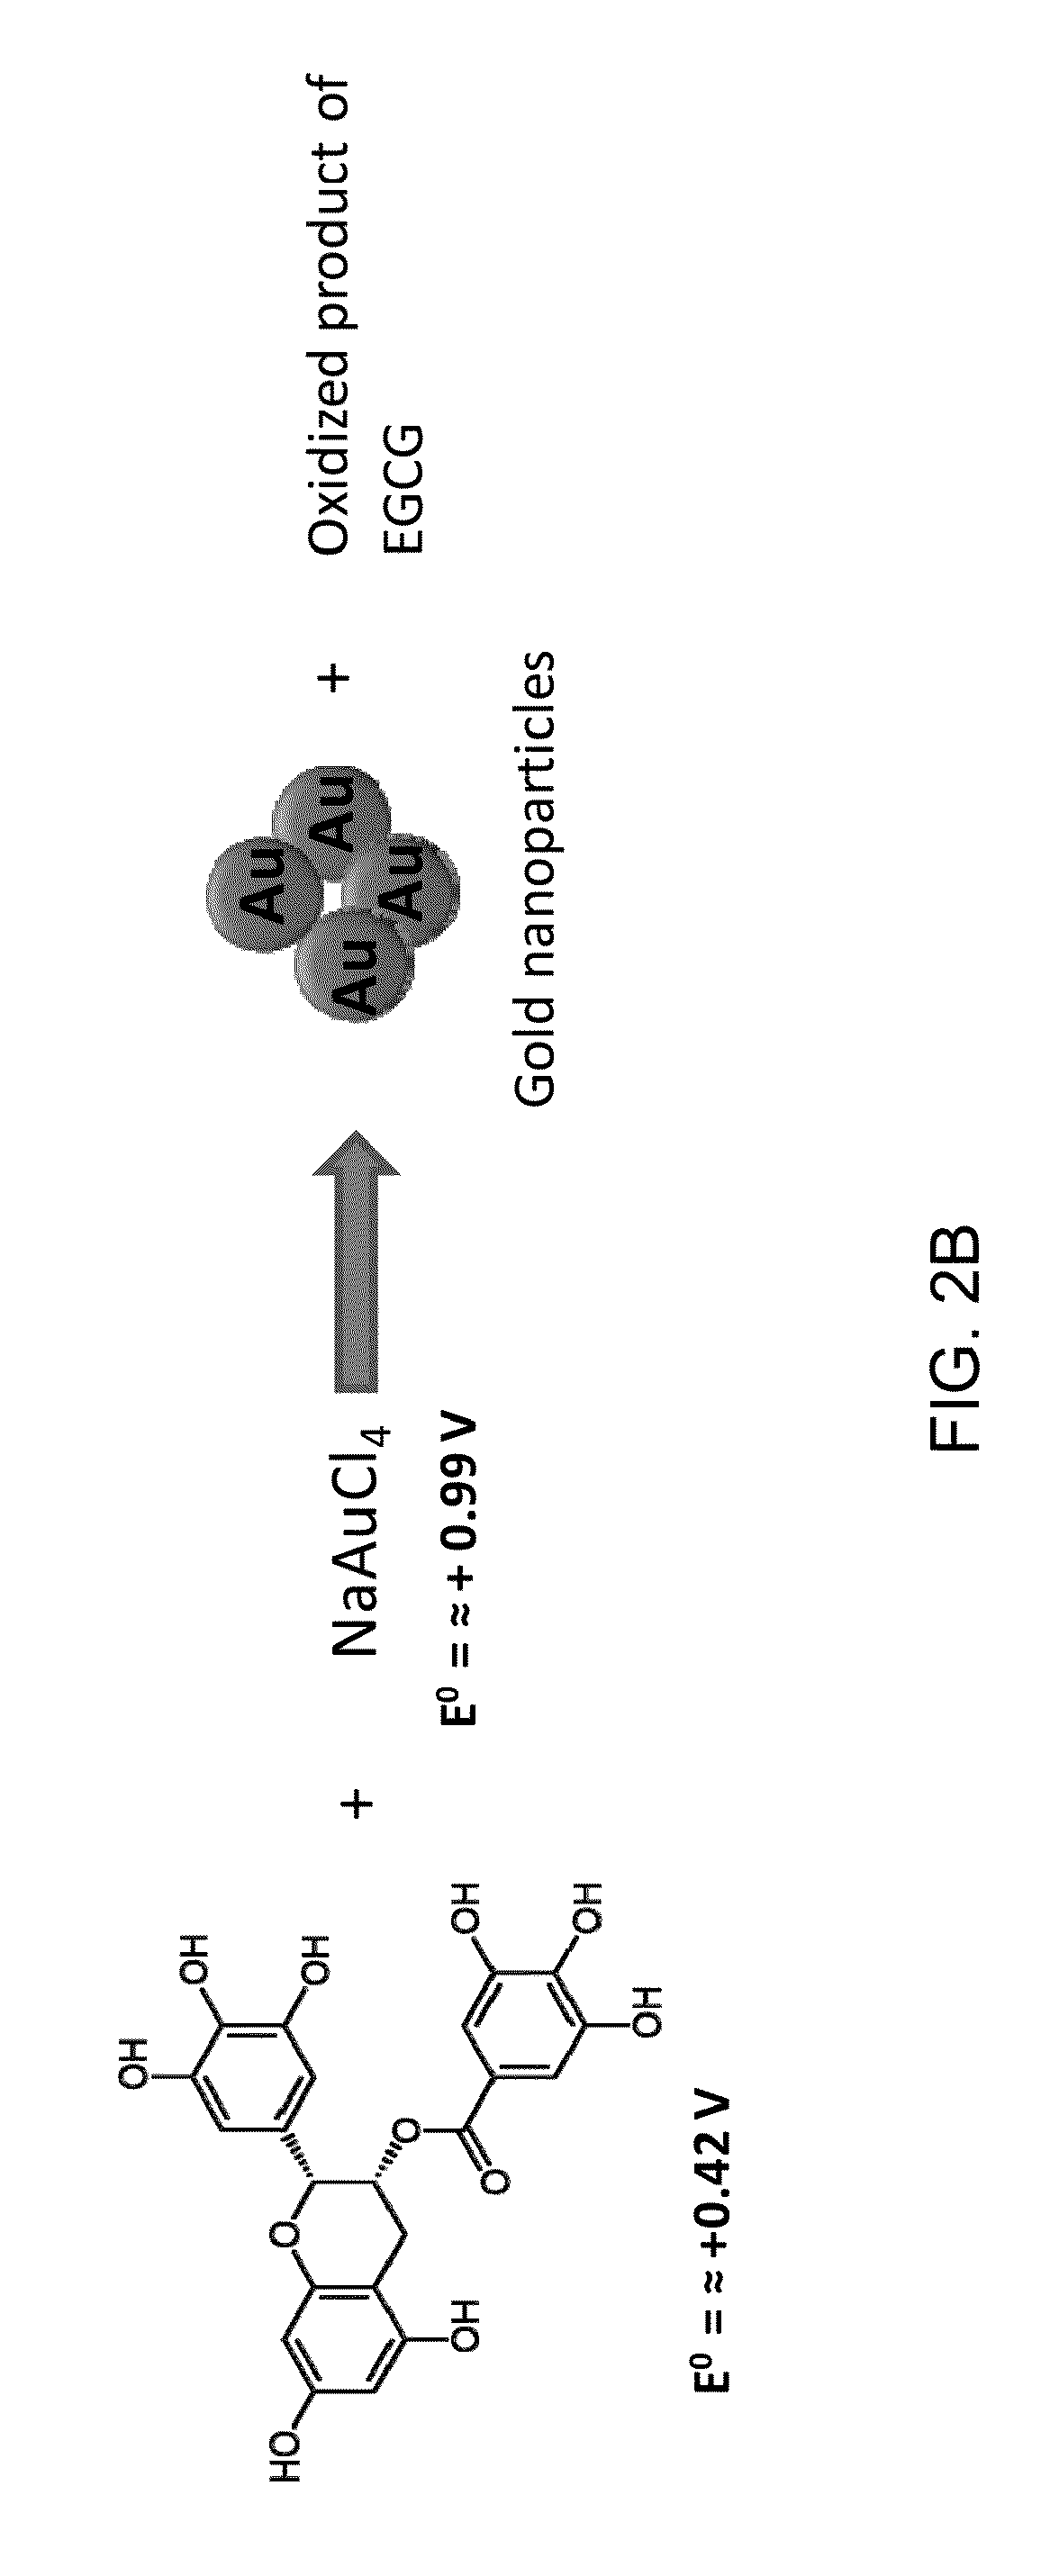 Egcg stabilized gold nanoparticles and method for making same